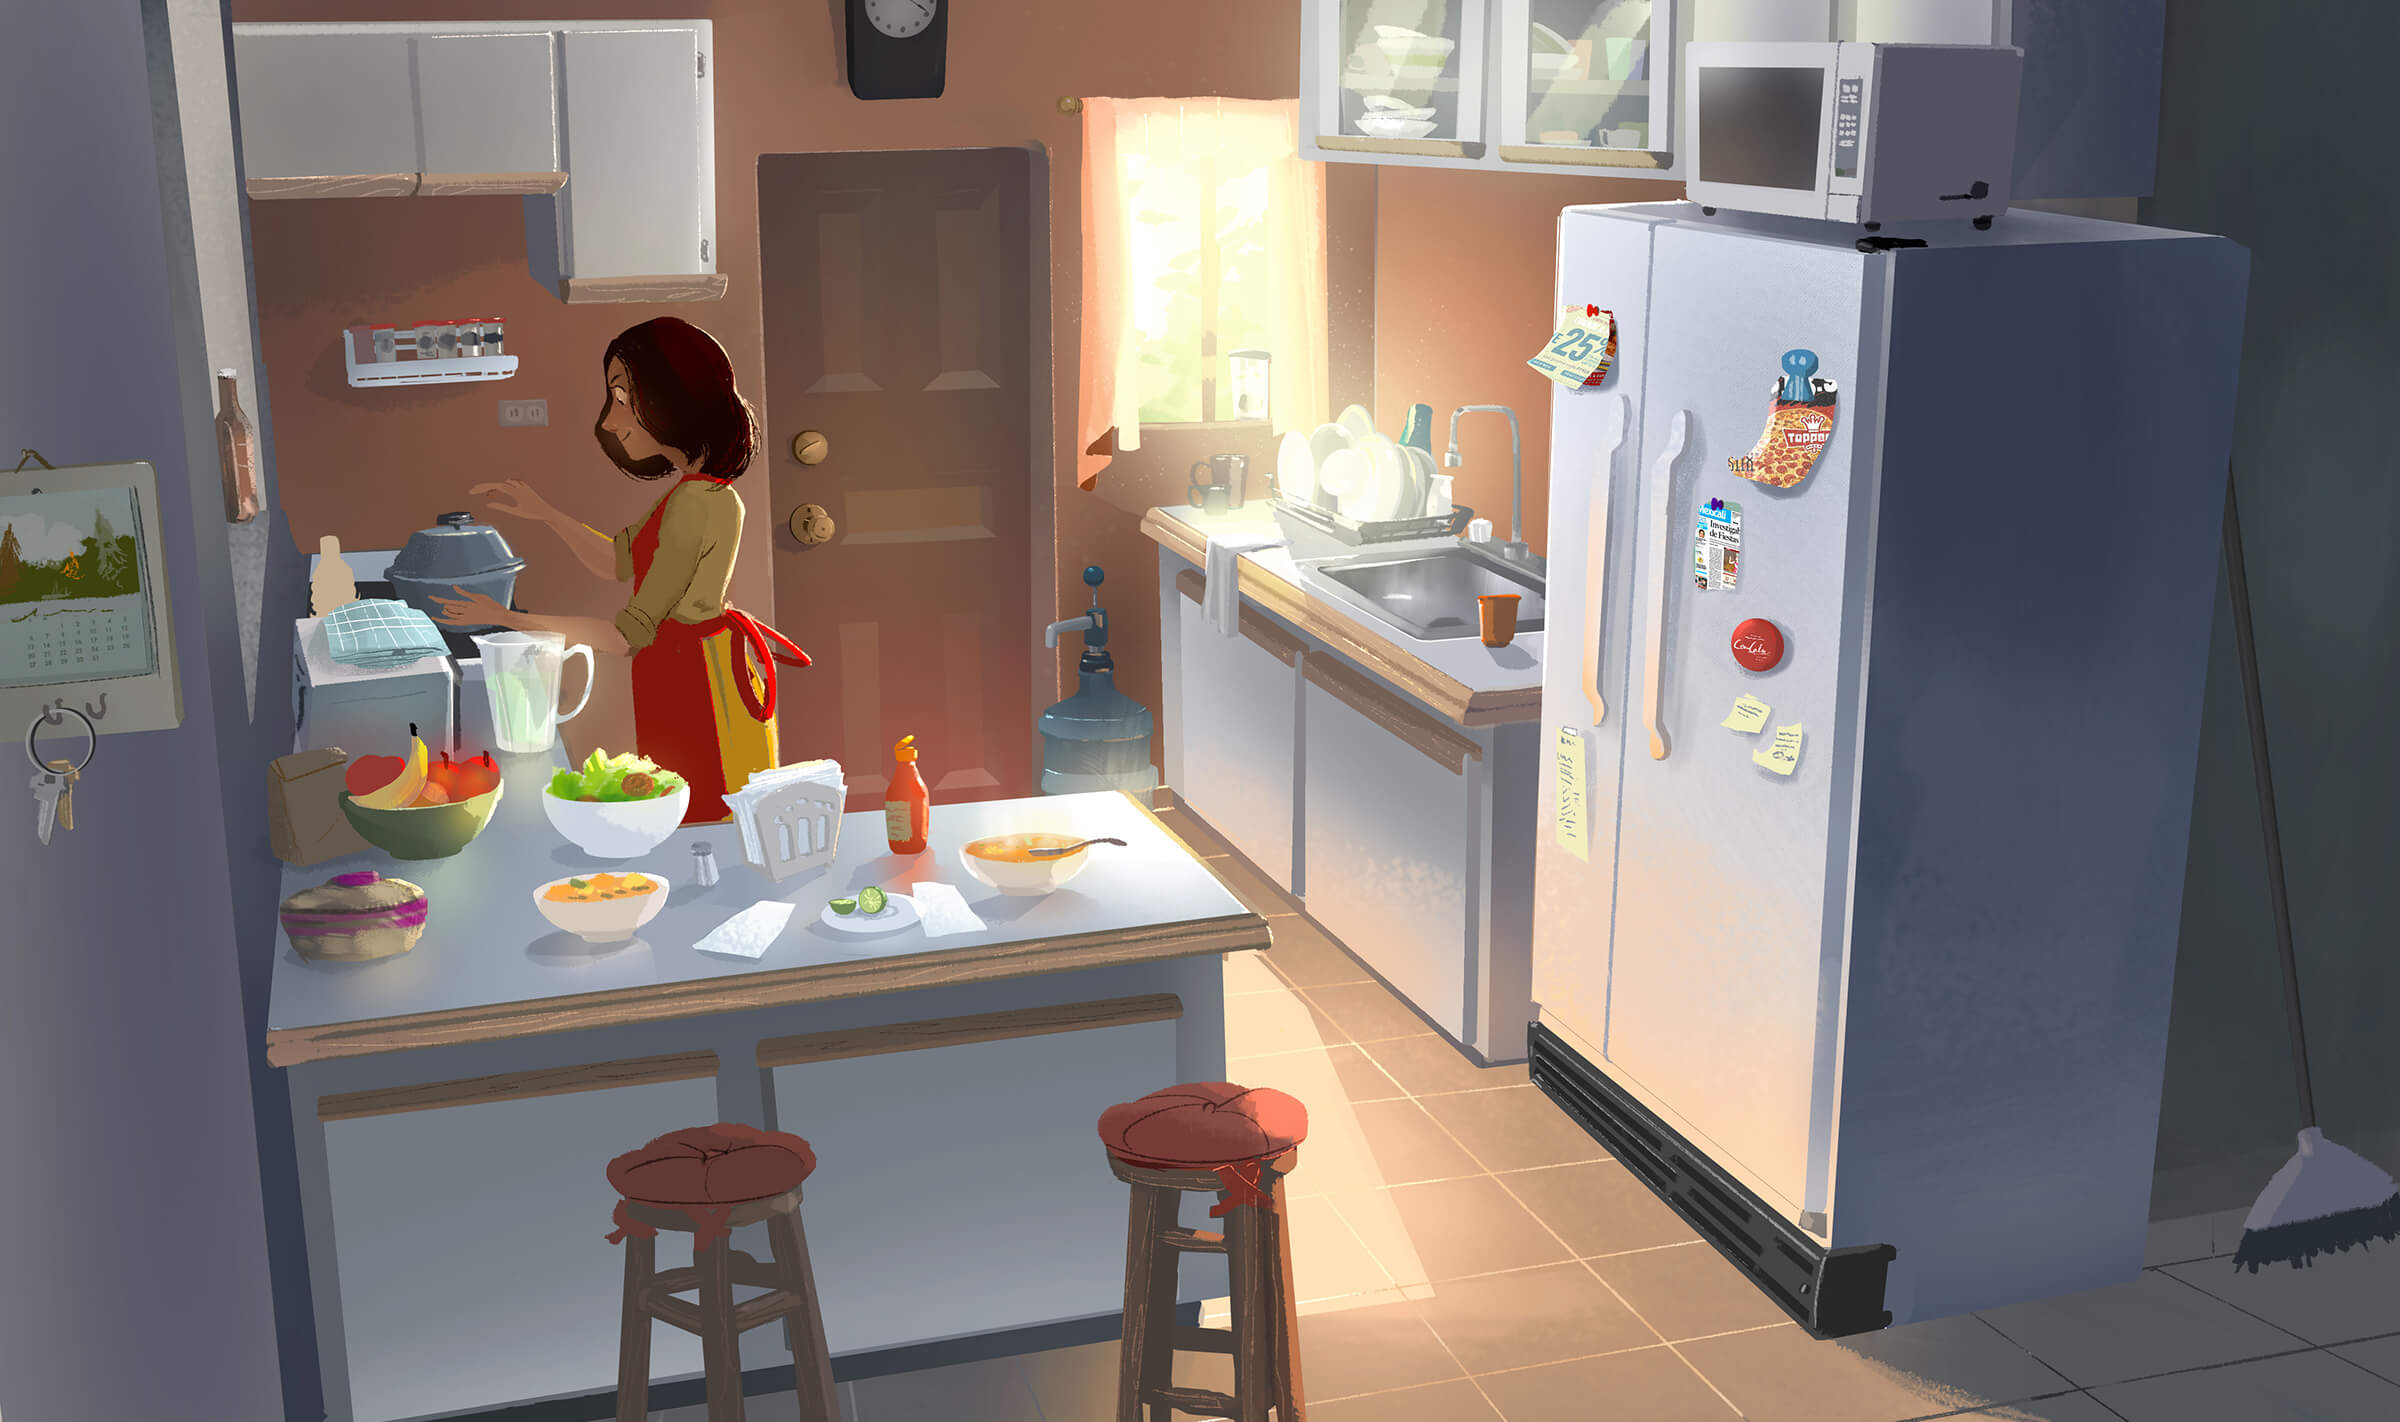 digital painting of a woman cooking at the stove in a small kitchen